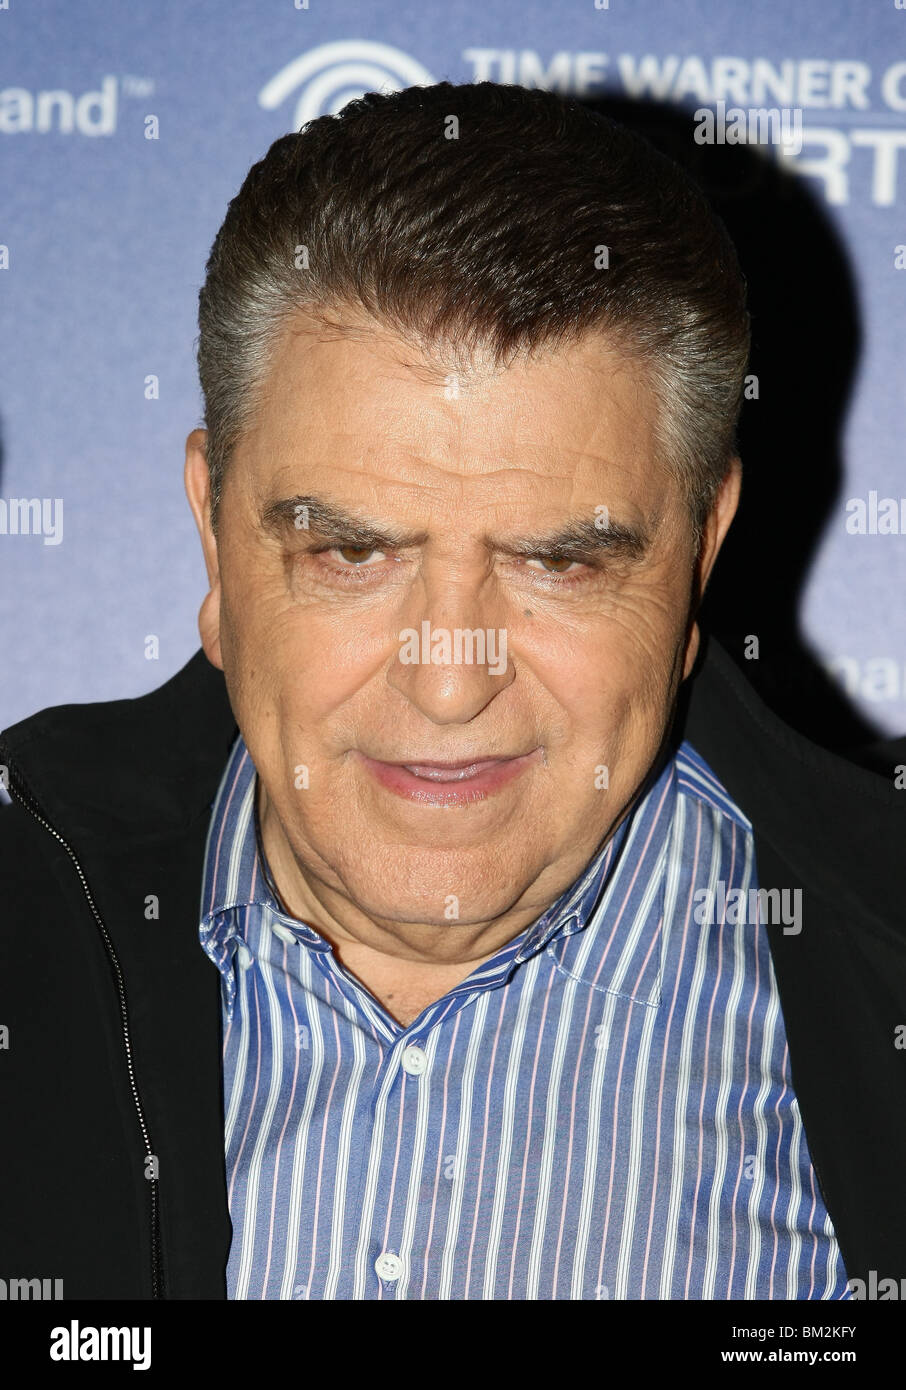 DON FRANCISCO TIME WARNER AND UNIVISON AIRING OF 2010 FIFA WORLD CUP GAMES ON LO MEJOR ON DEMAND EVENT WITH SABADO GIGANTE TV SH Stock Photo